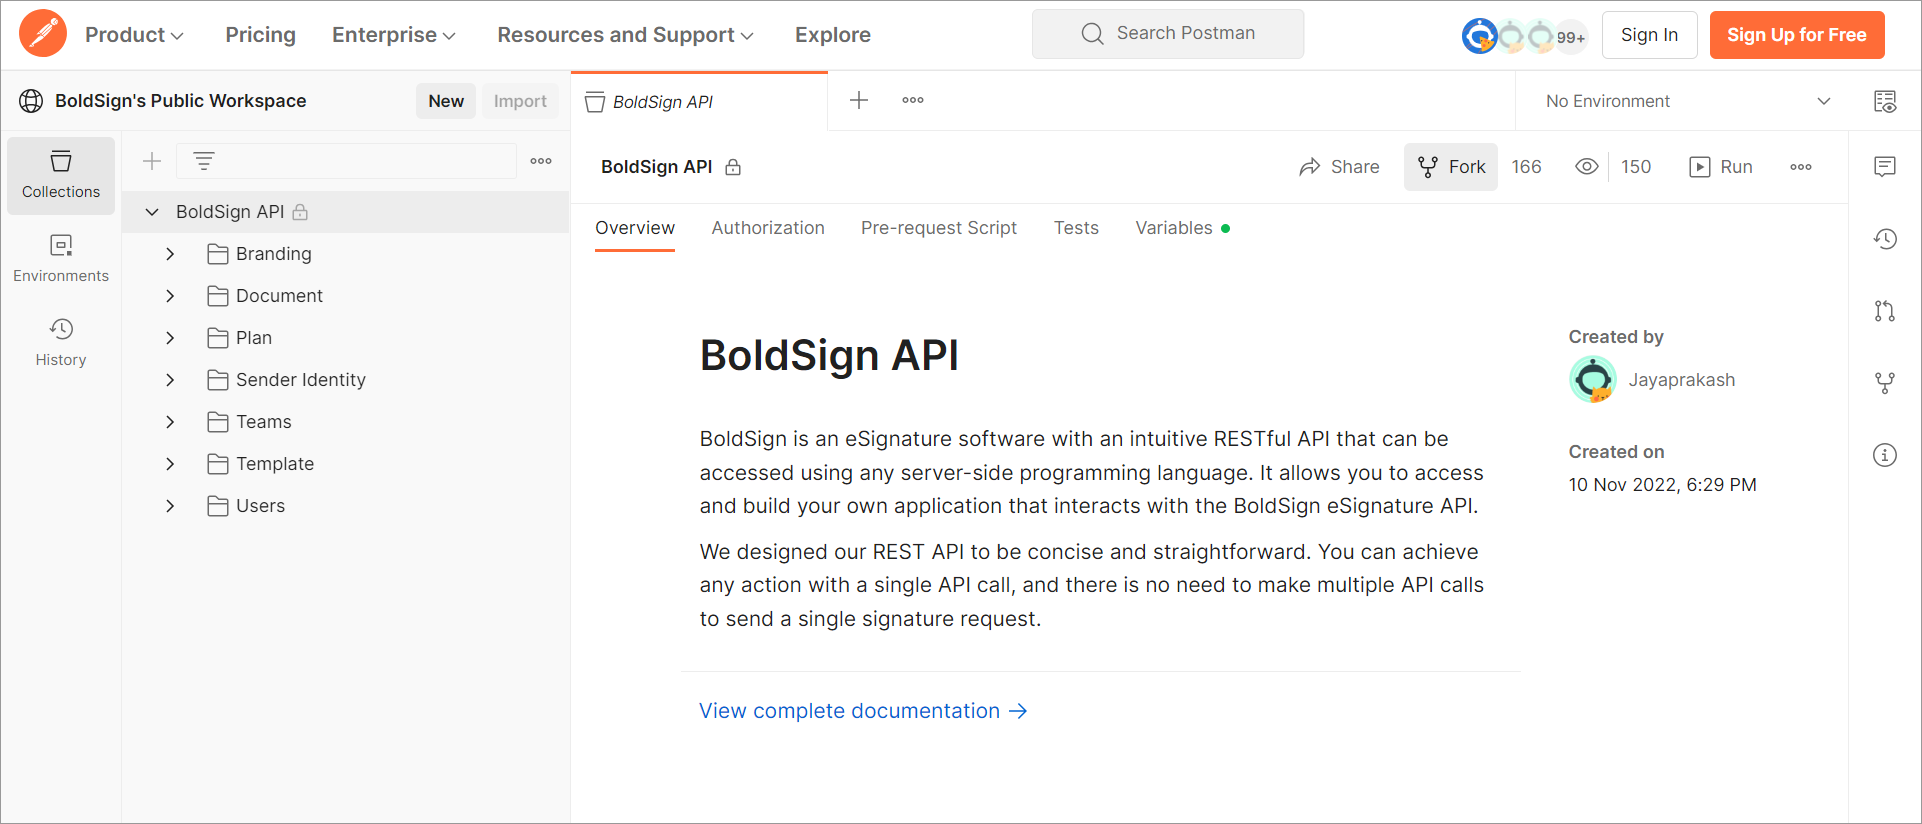 BoldSign API collection in Postman